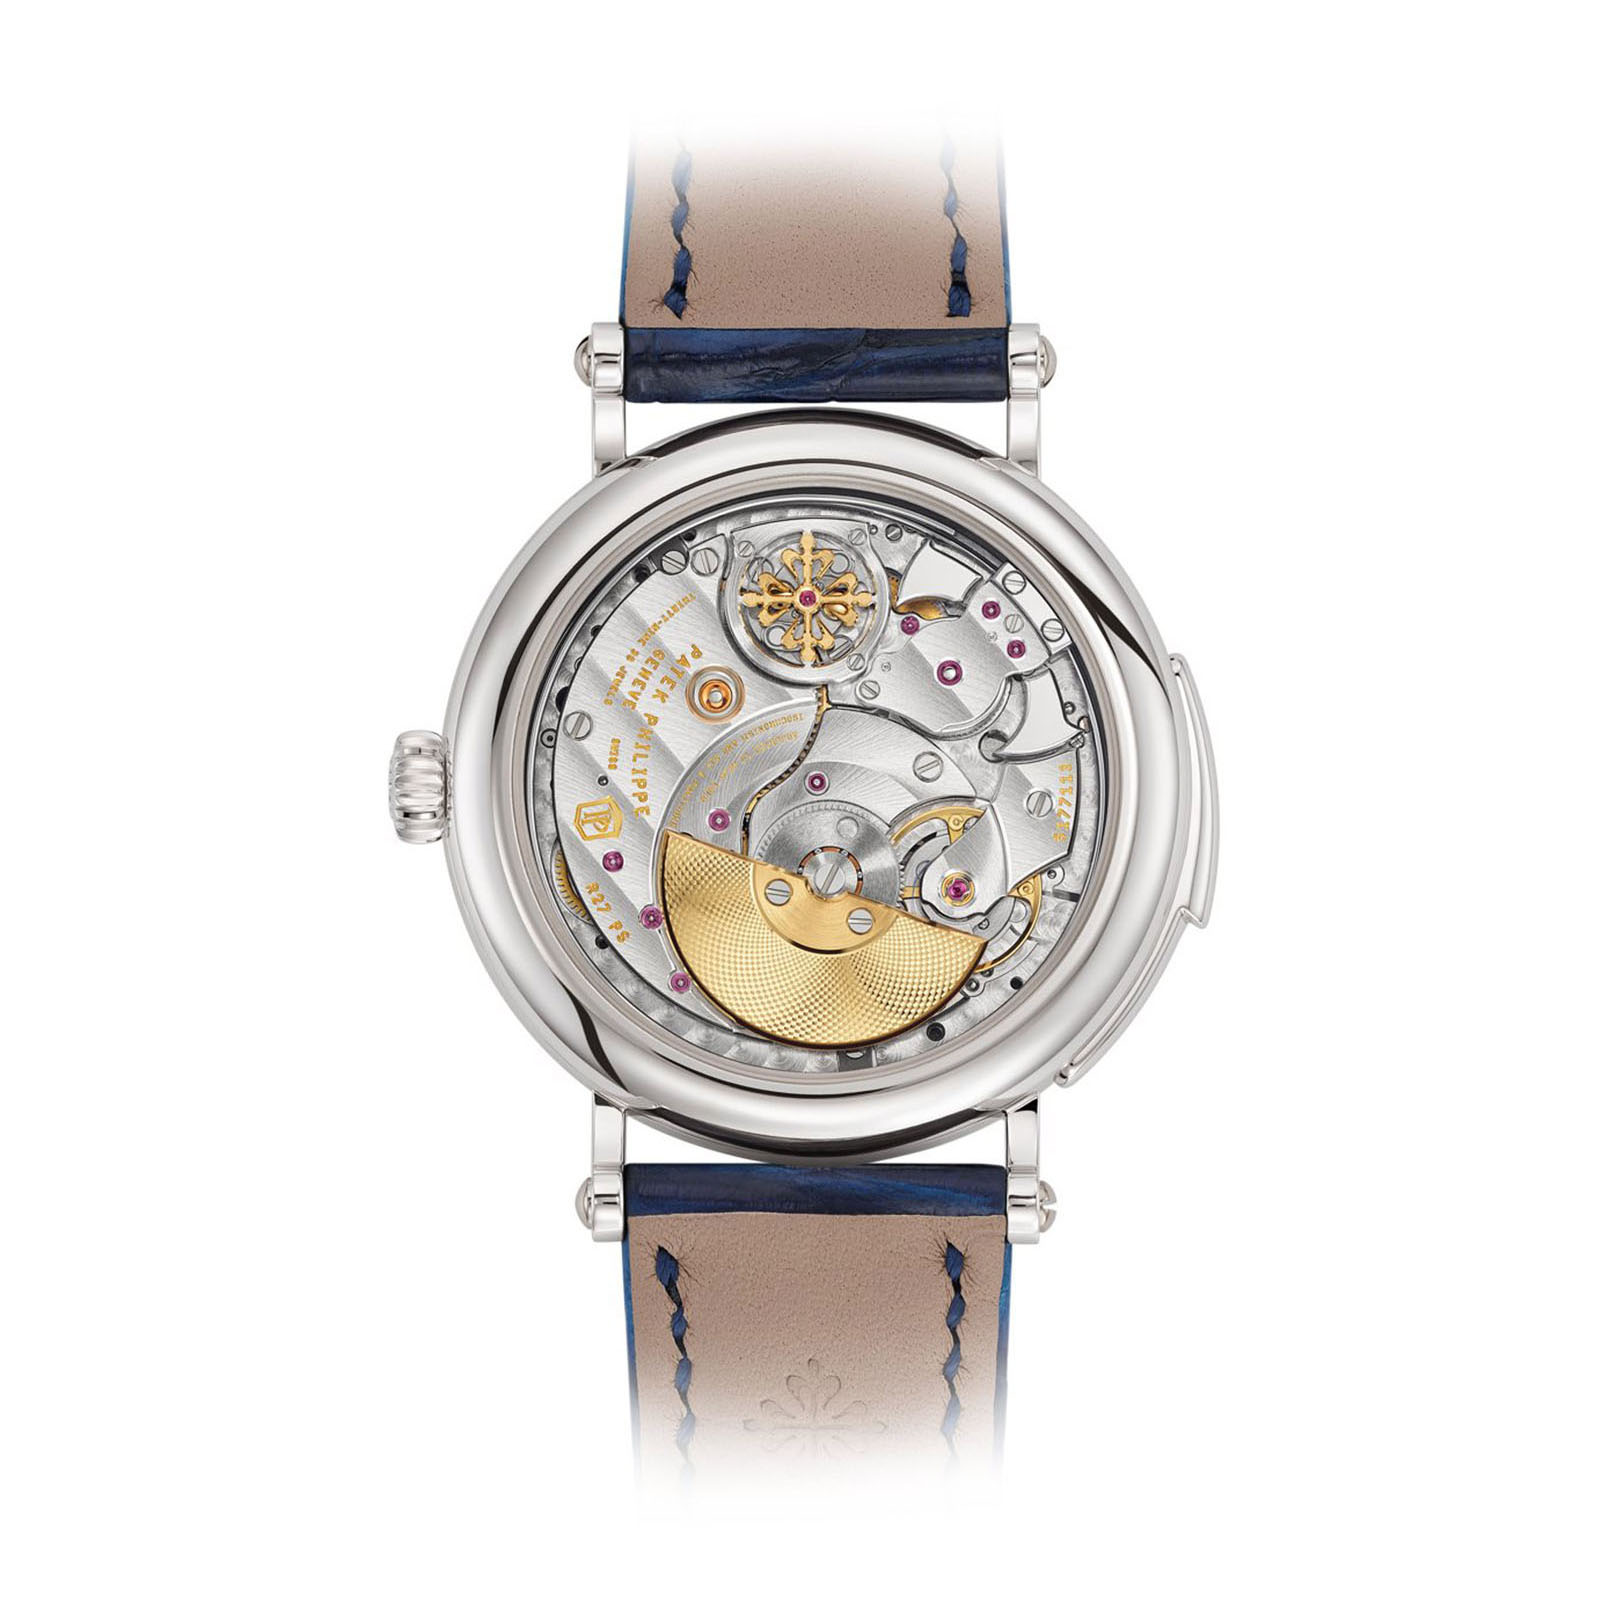 Grand Complications Ladies' Minute Repeater gallery 1